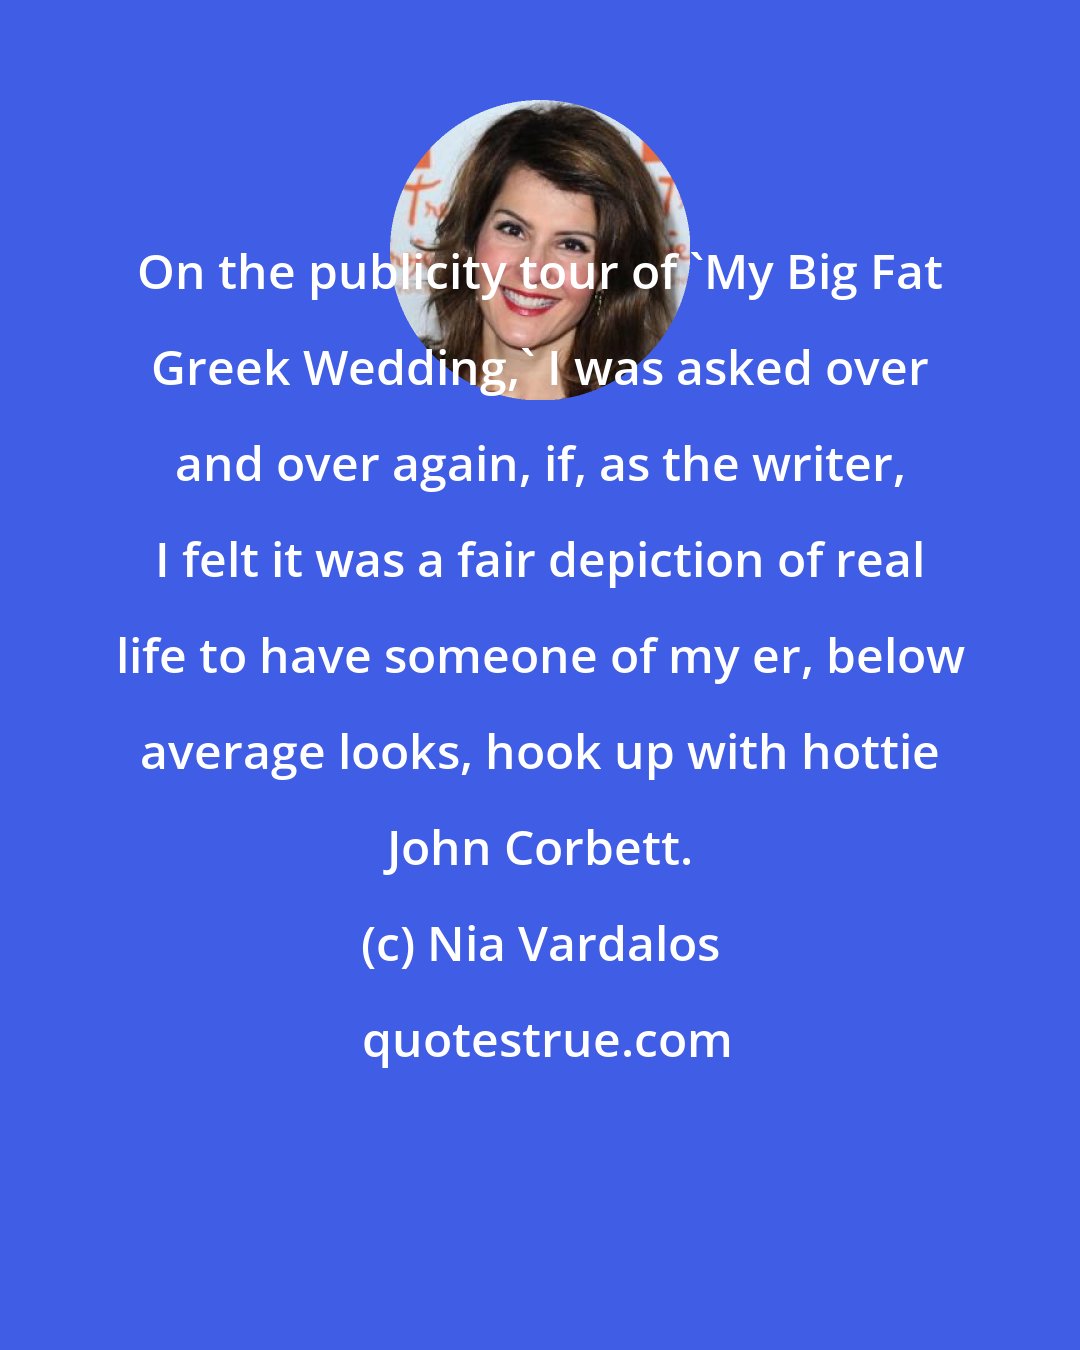 Nia Vardalos: On the publicity tour of 'My Big Fat Greek Wedding,' I was asked over and over again, if, as the writer, I felt it was a fair depiction of real life to have someone of my er, below average looks, hook up with hottie John Corbett.